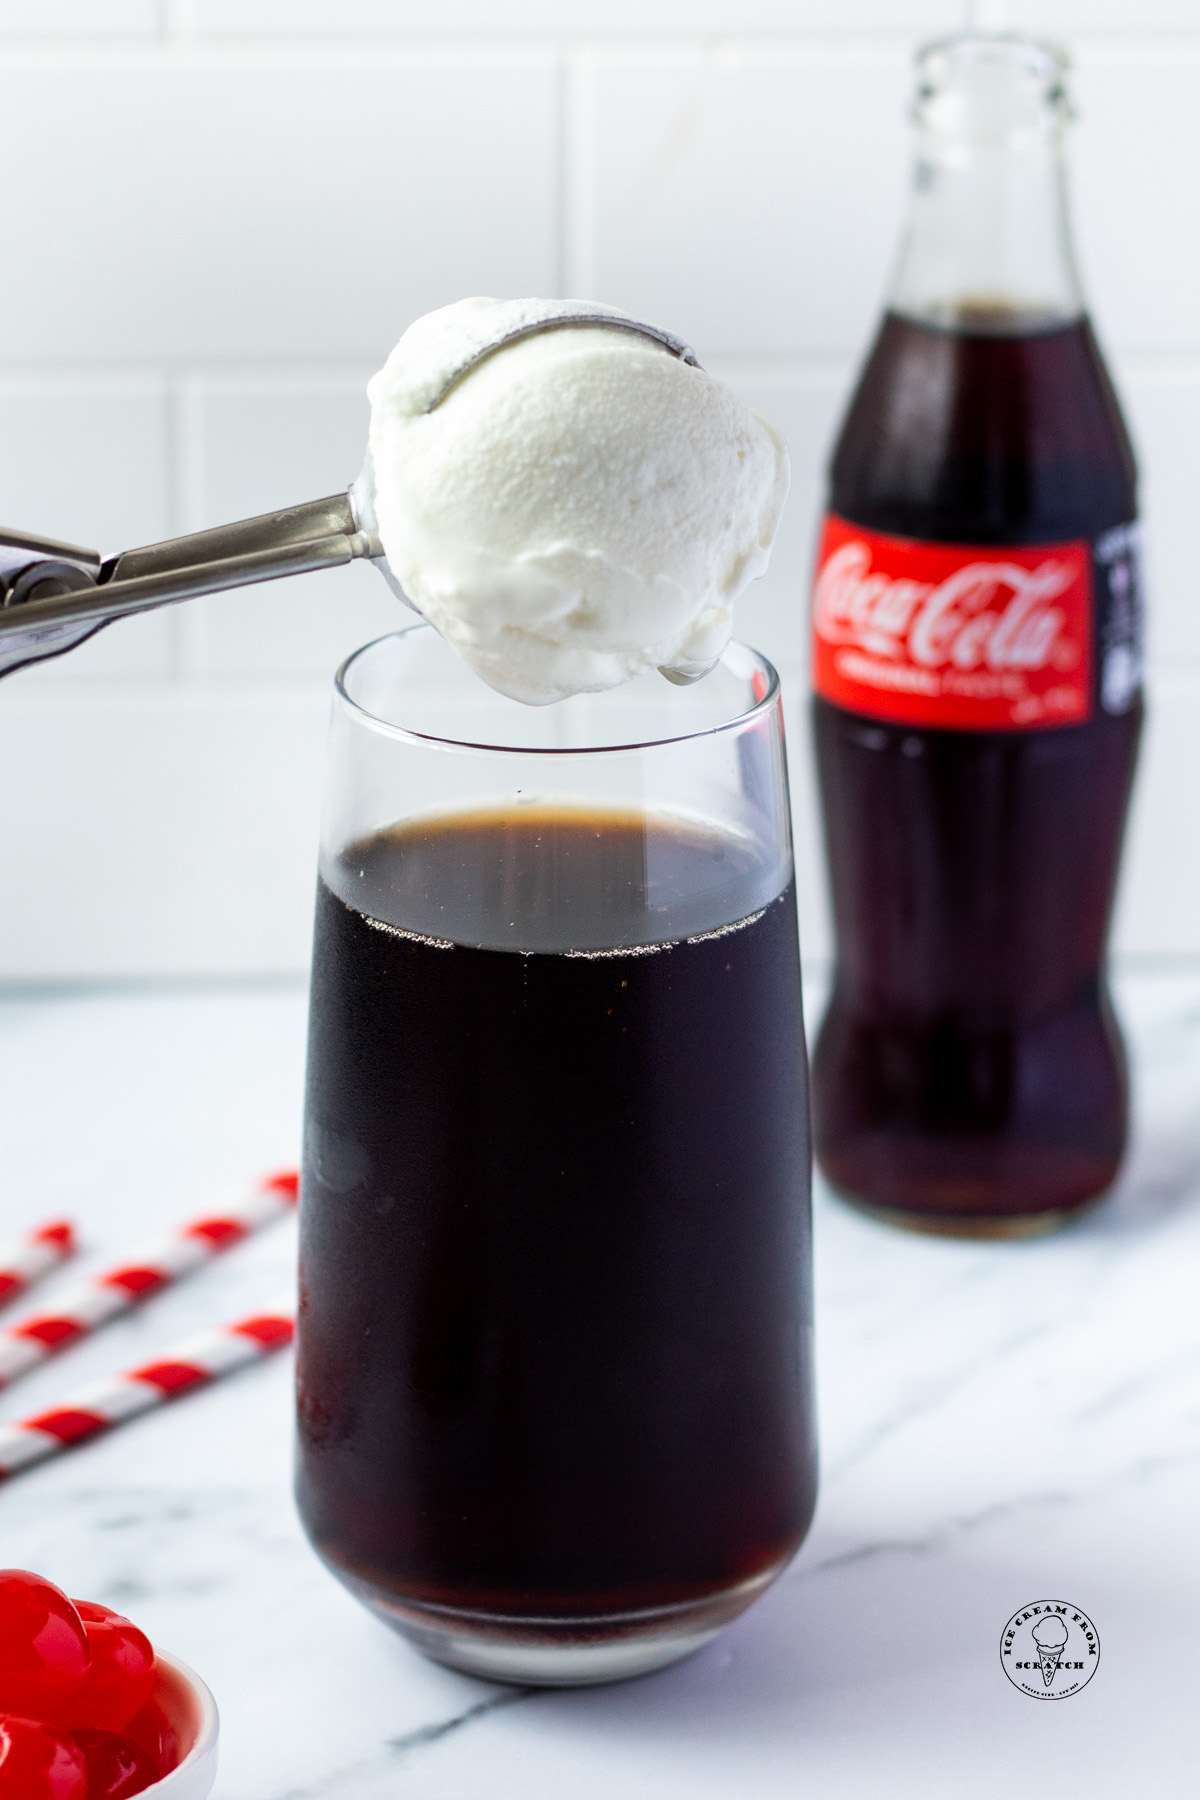 a glass of coke with a scoop of vanilla ice cream being added.